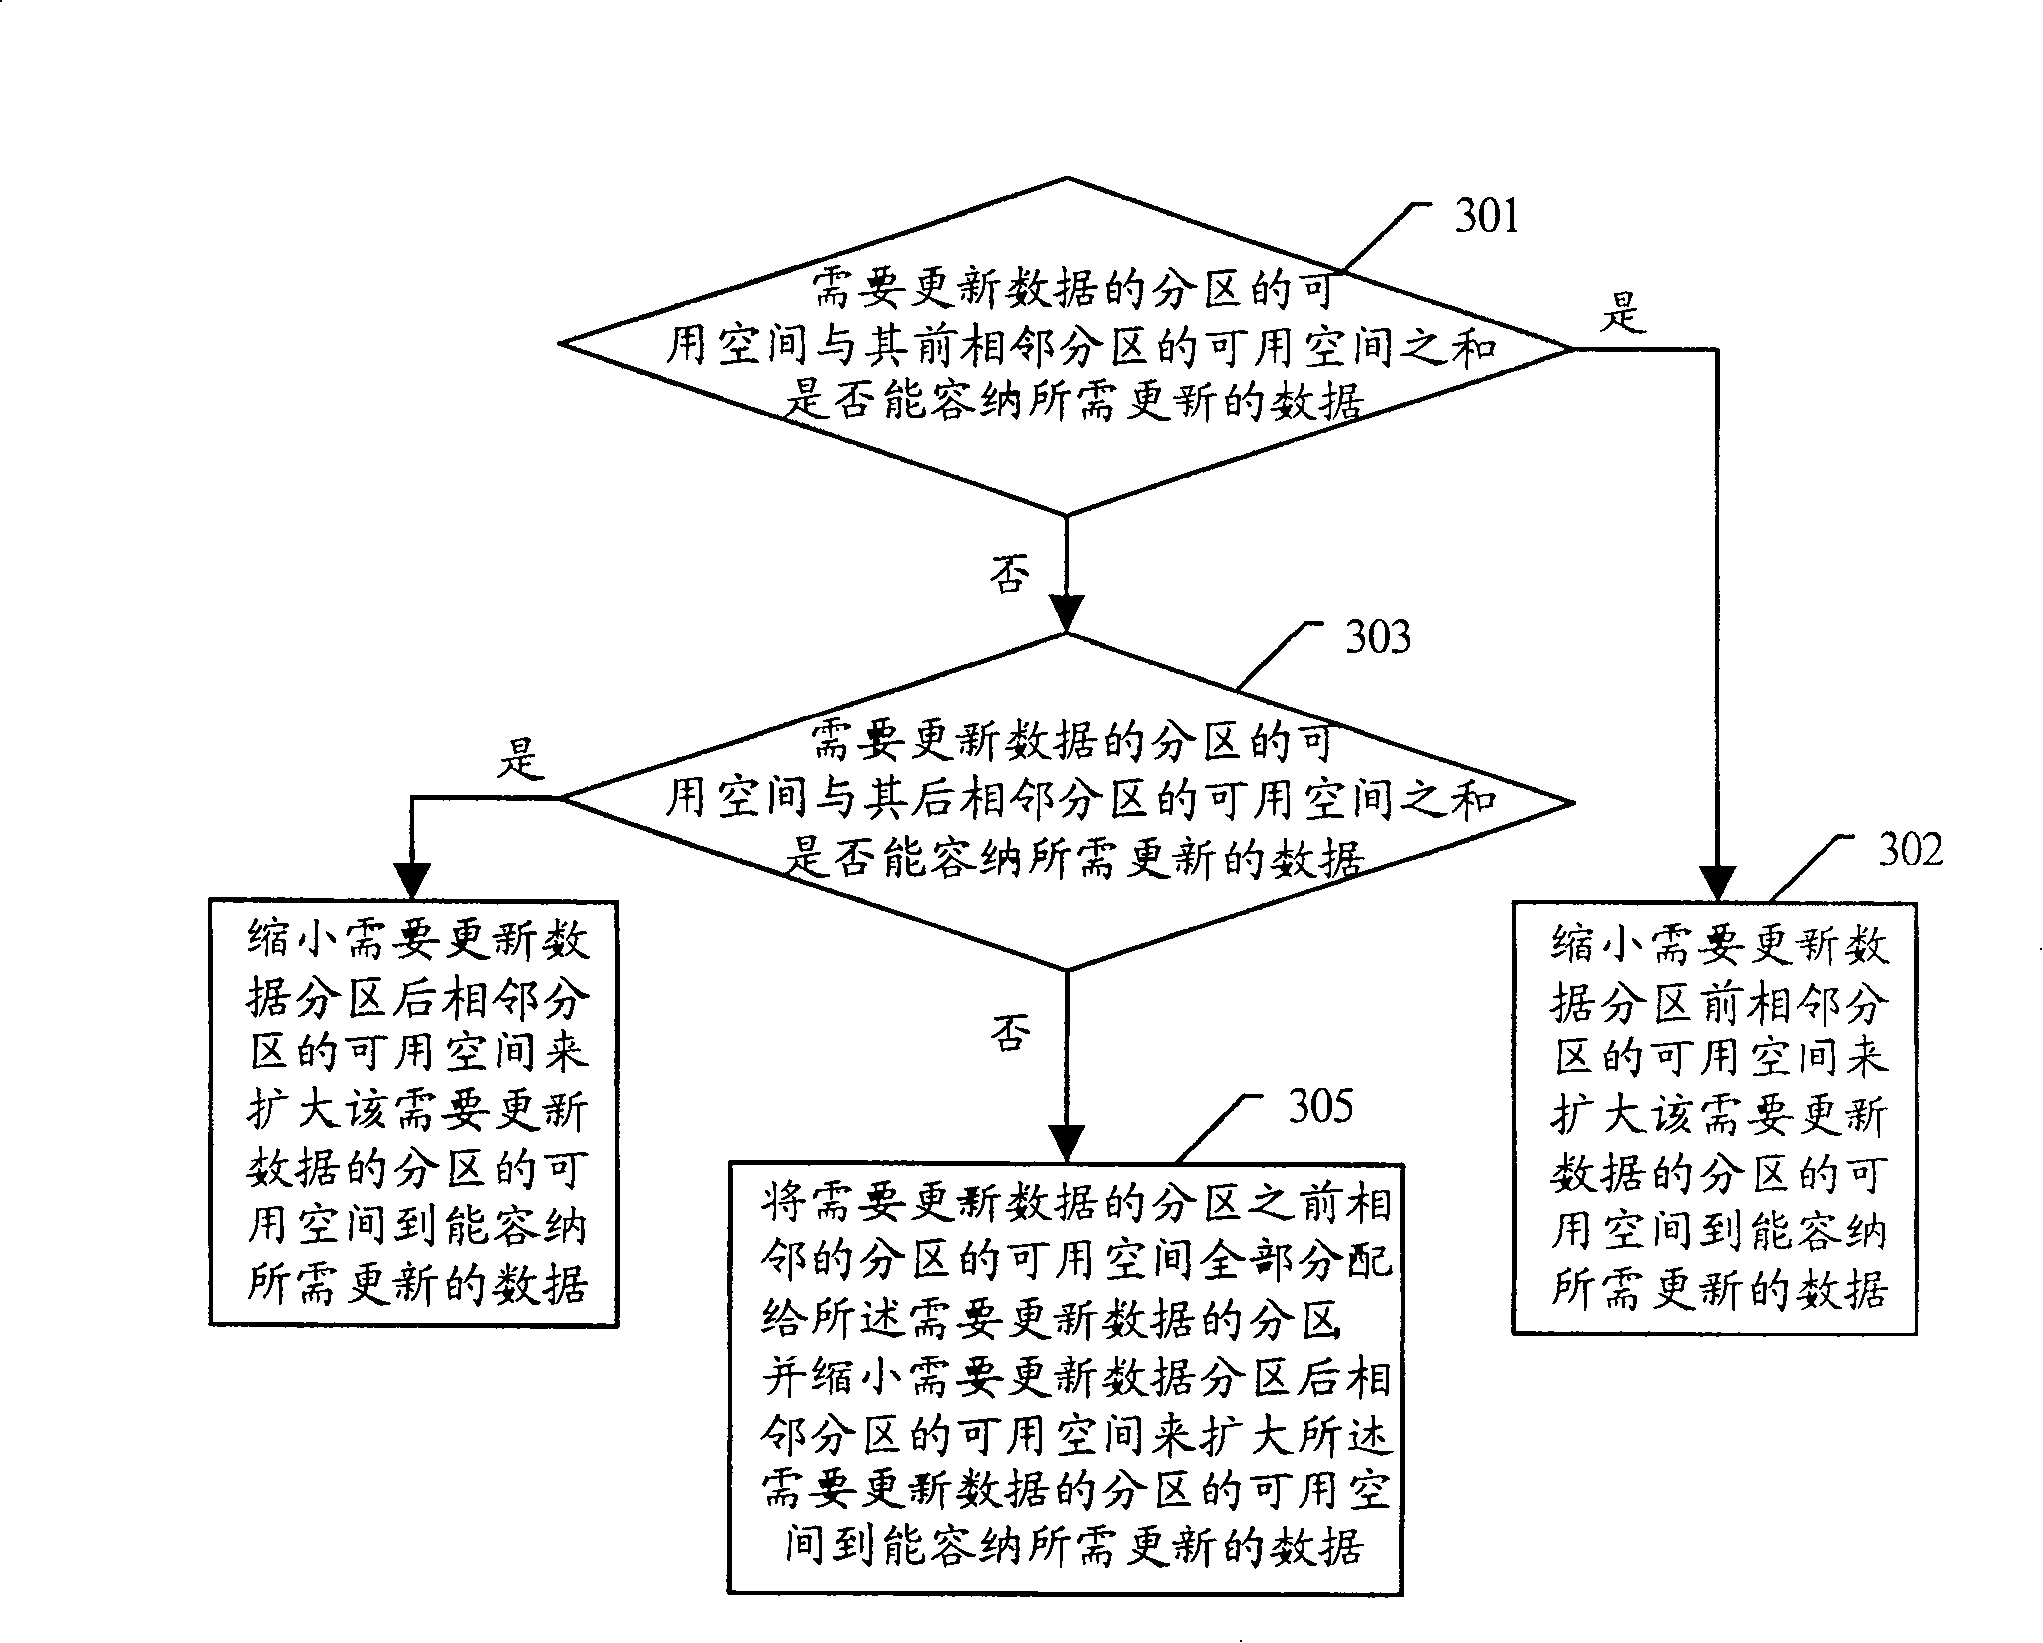 Method and apparatus for updating data